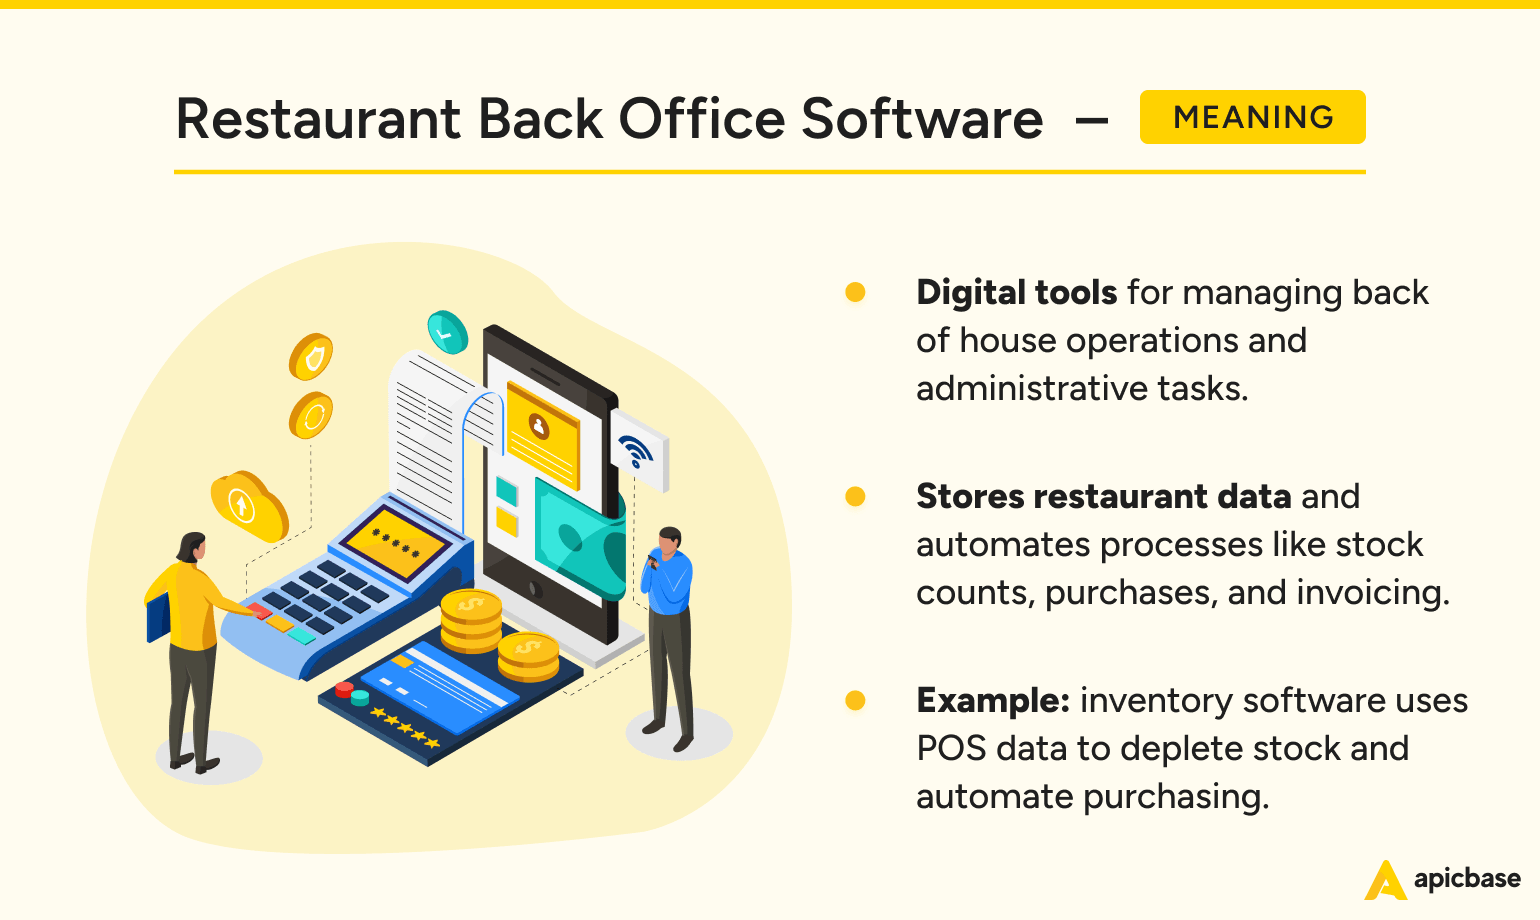 Restaurant Back Office Software Meaning